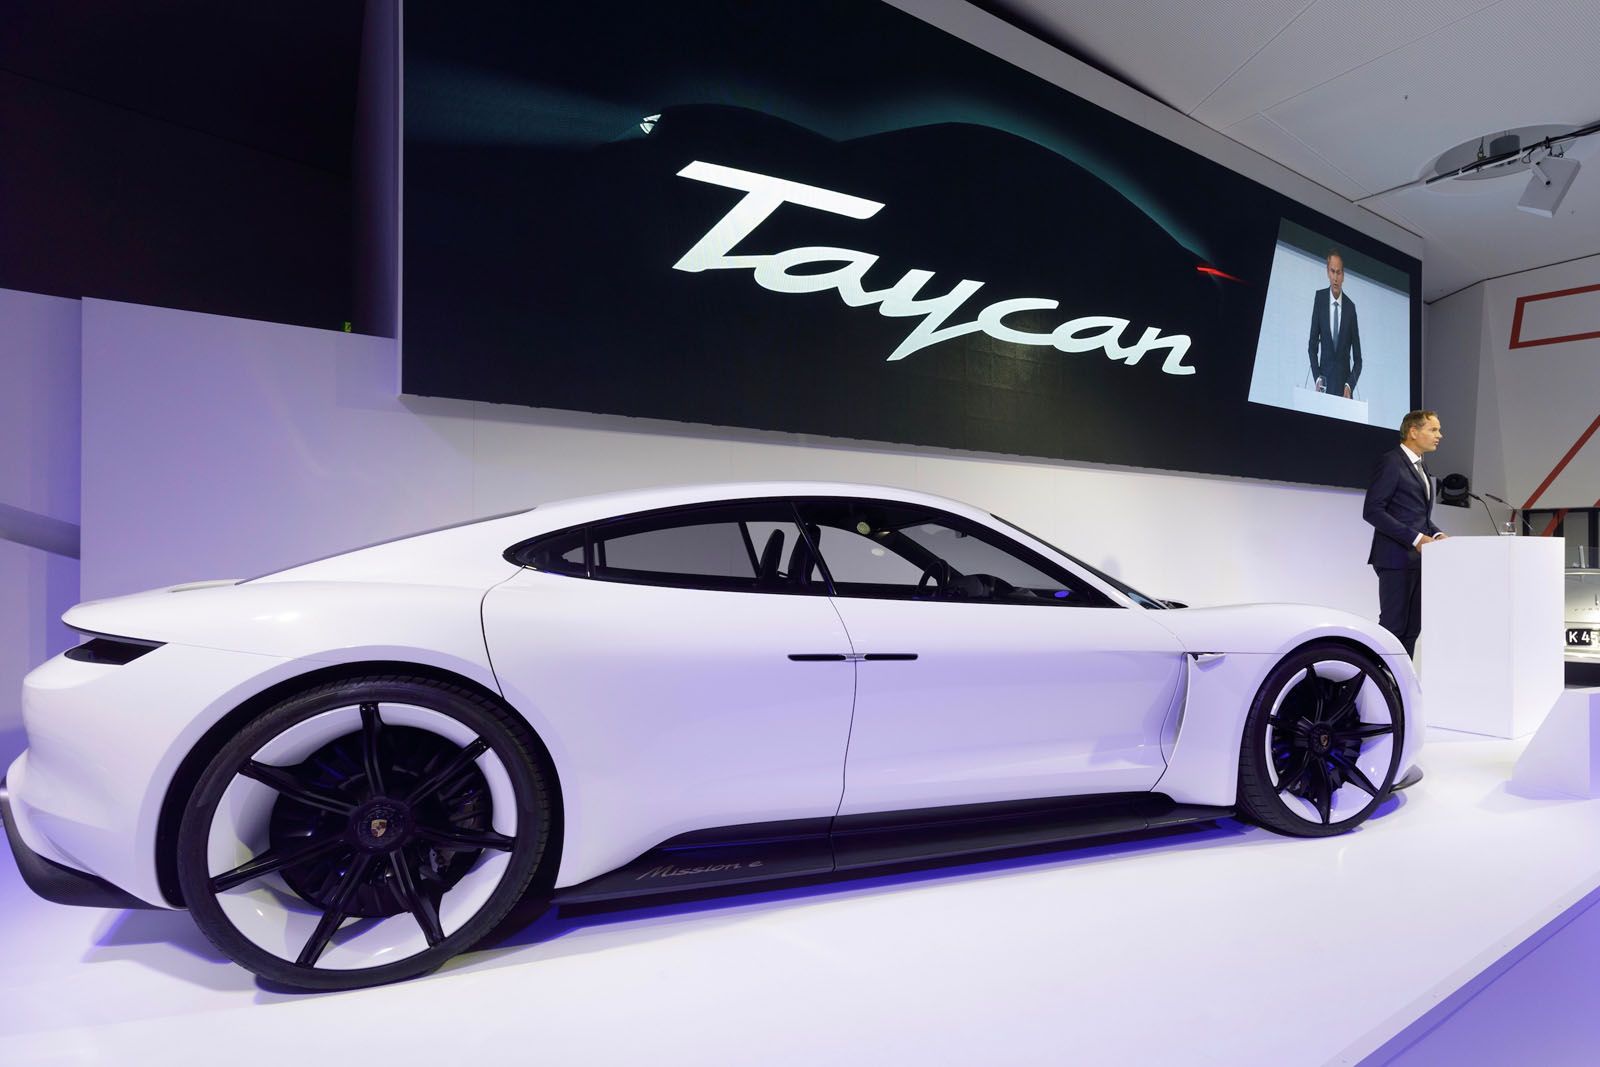 Porsches First All-electric Car Is The Taycan image 1